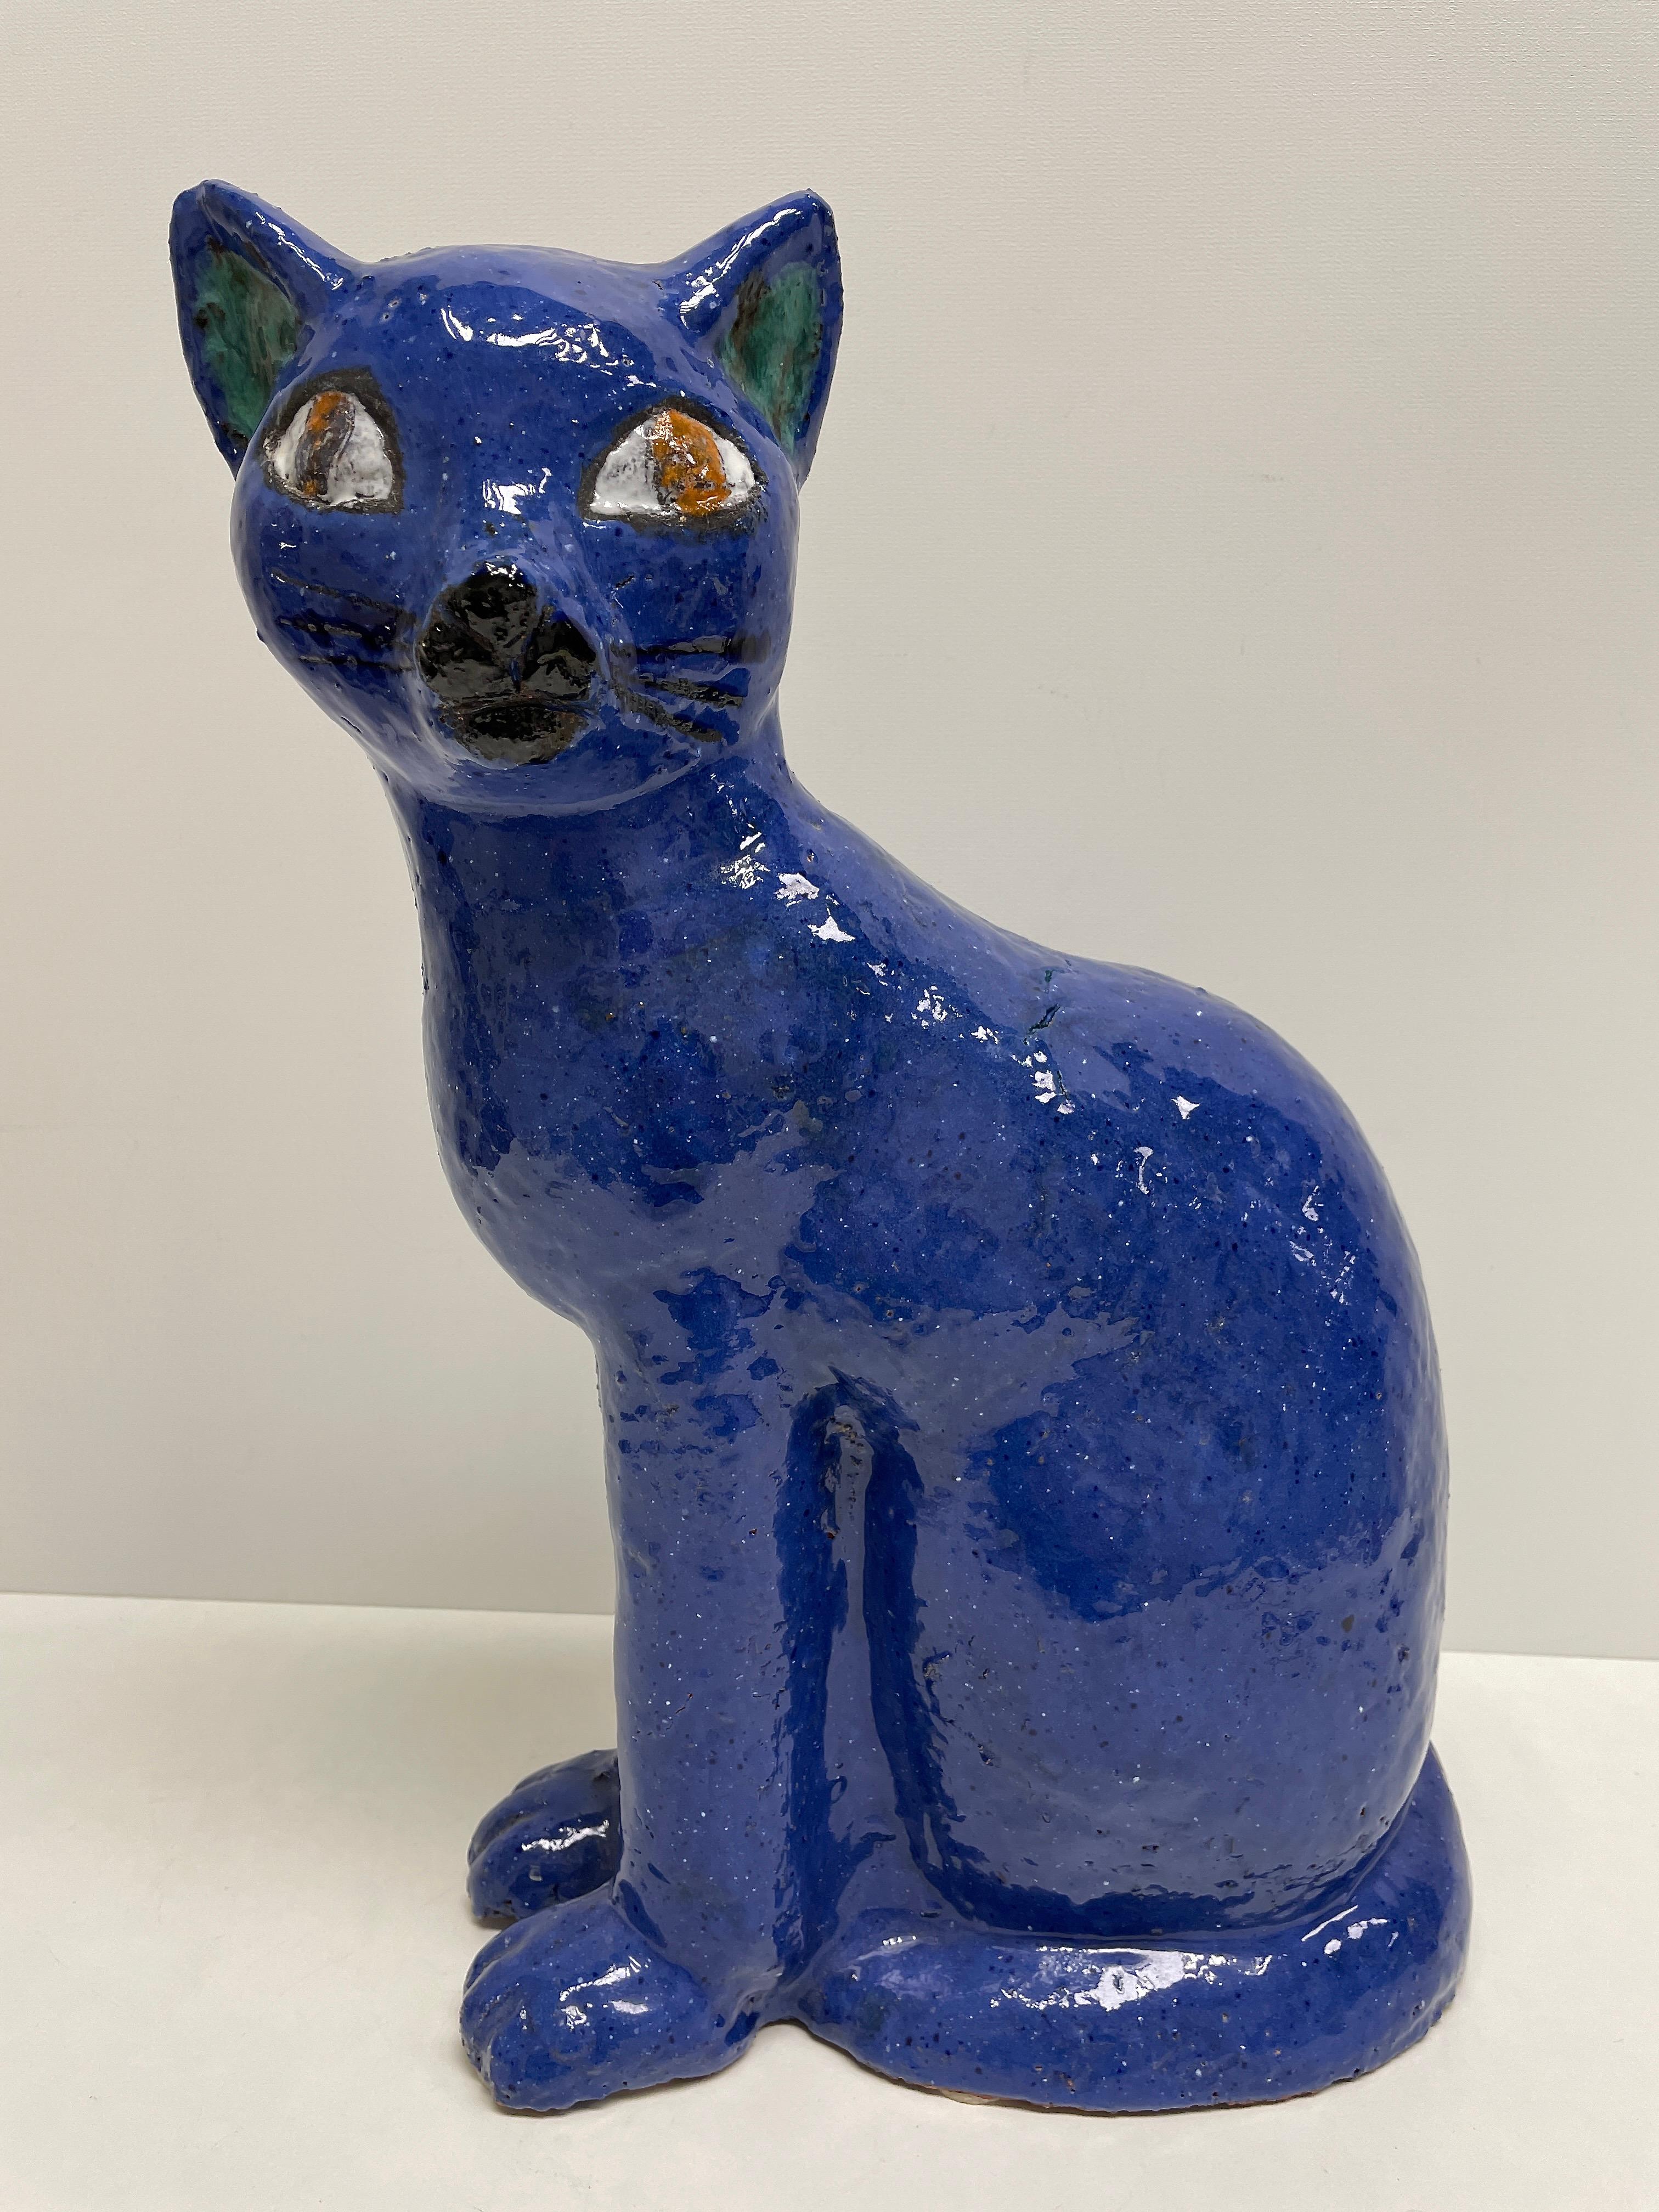 Mid-Century Modern 1970s German cat earthenware statue figurine. Nice addition to your room or entry hall. Made of earthenware ceramic, hand painted. A hand made studio pottery item that shows the beauty of the object and the artistic ability of the